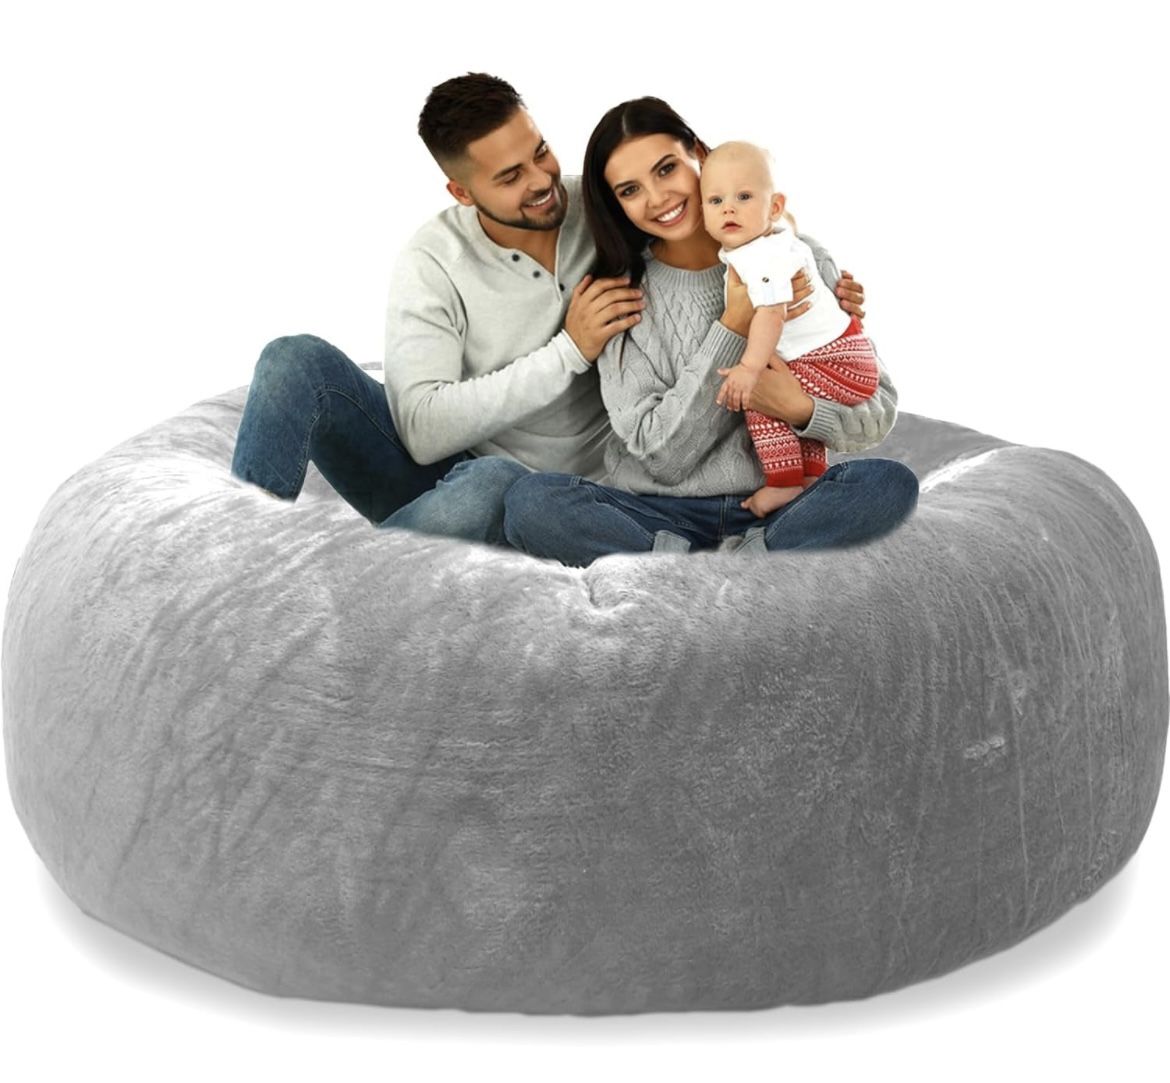 LCYFBE Bean Bag Chairs, Giant Bean Bag Chair for Adults, 6ft Big Bean Bag Cover Comfy Bean Bag Bed (No Filler, Cover only) Fluffy Lazy Sofa, Light Gre